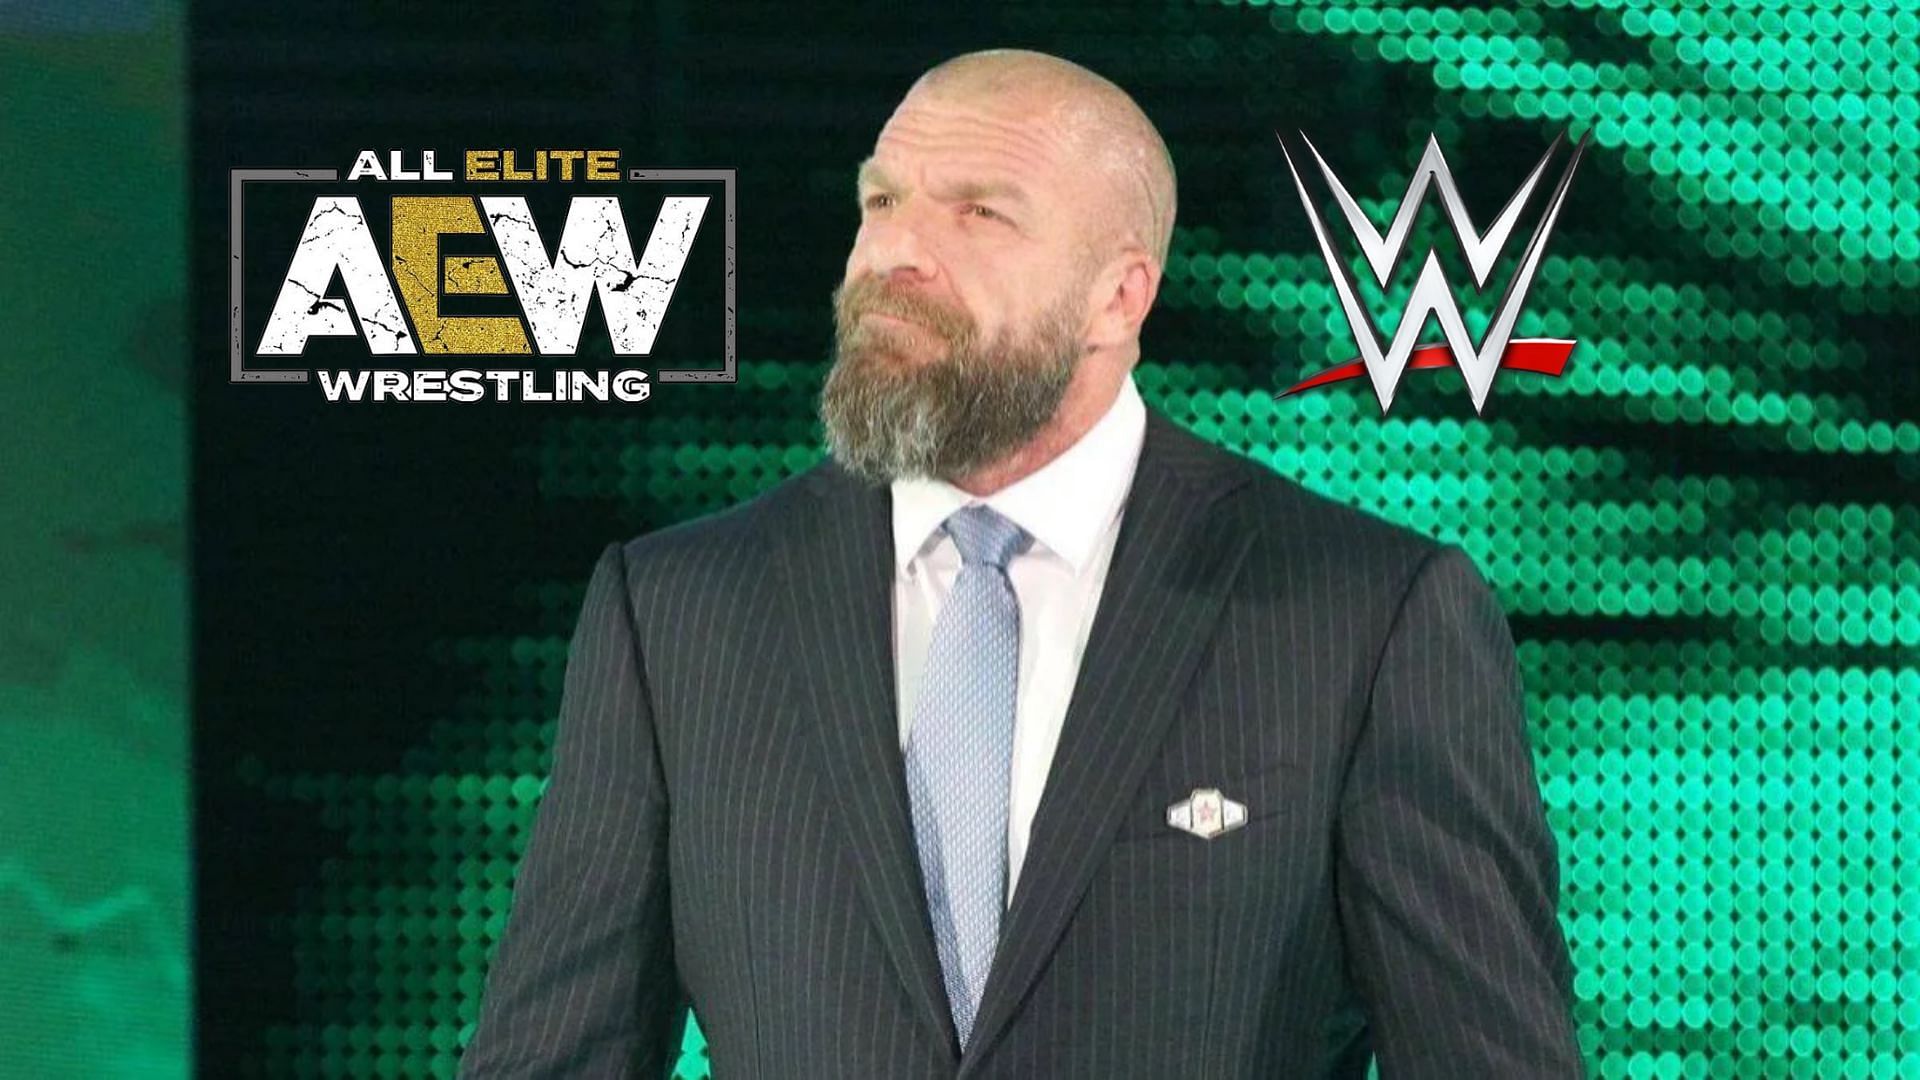 WWE Head of Creative Triple H and a former AEW World Champion could reunite in the future.